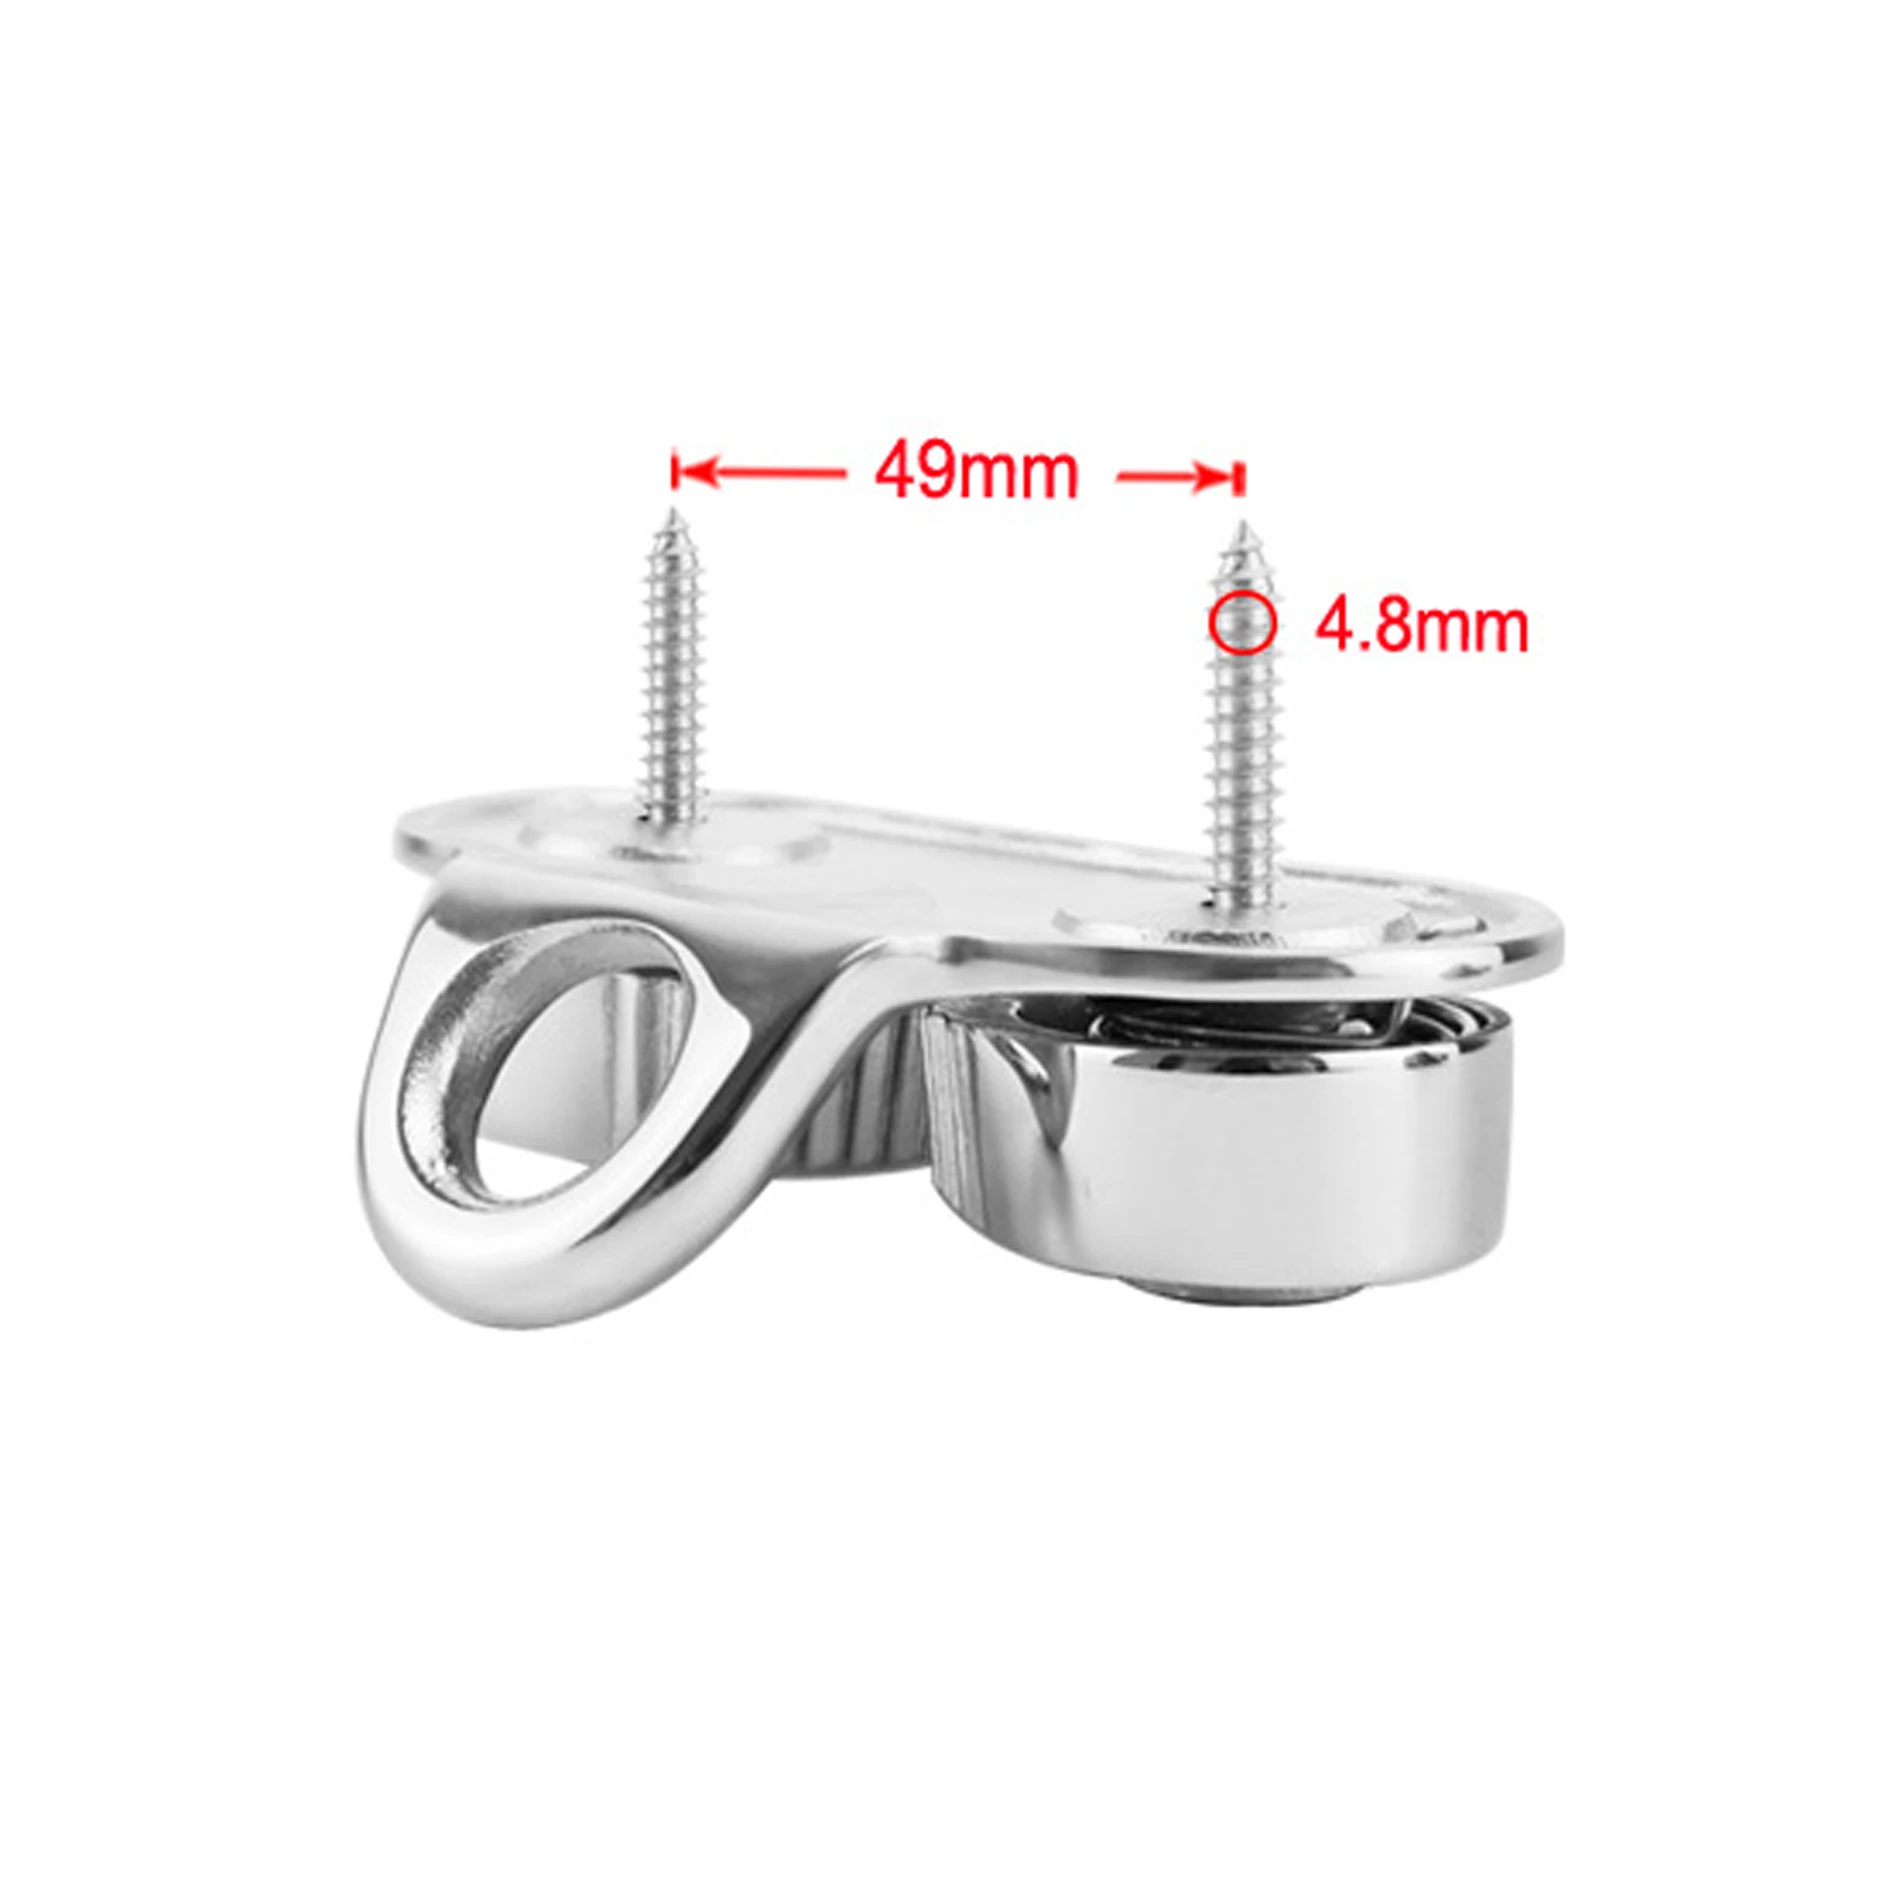 Stainless Steel 316 Cam Cleat with Leading Ring Boat Cam Cleats Matic Fairlead Marine Sailing Sailboat Kayak Canoe Dinghy enlarge